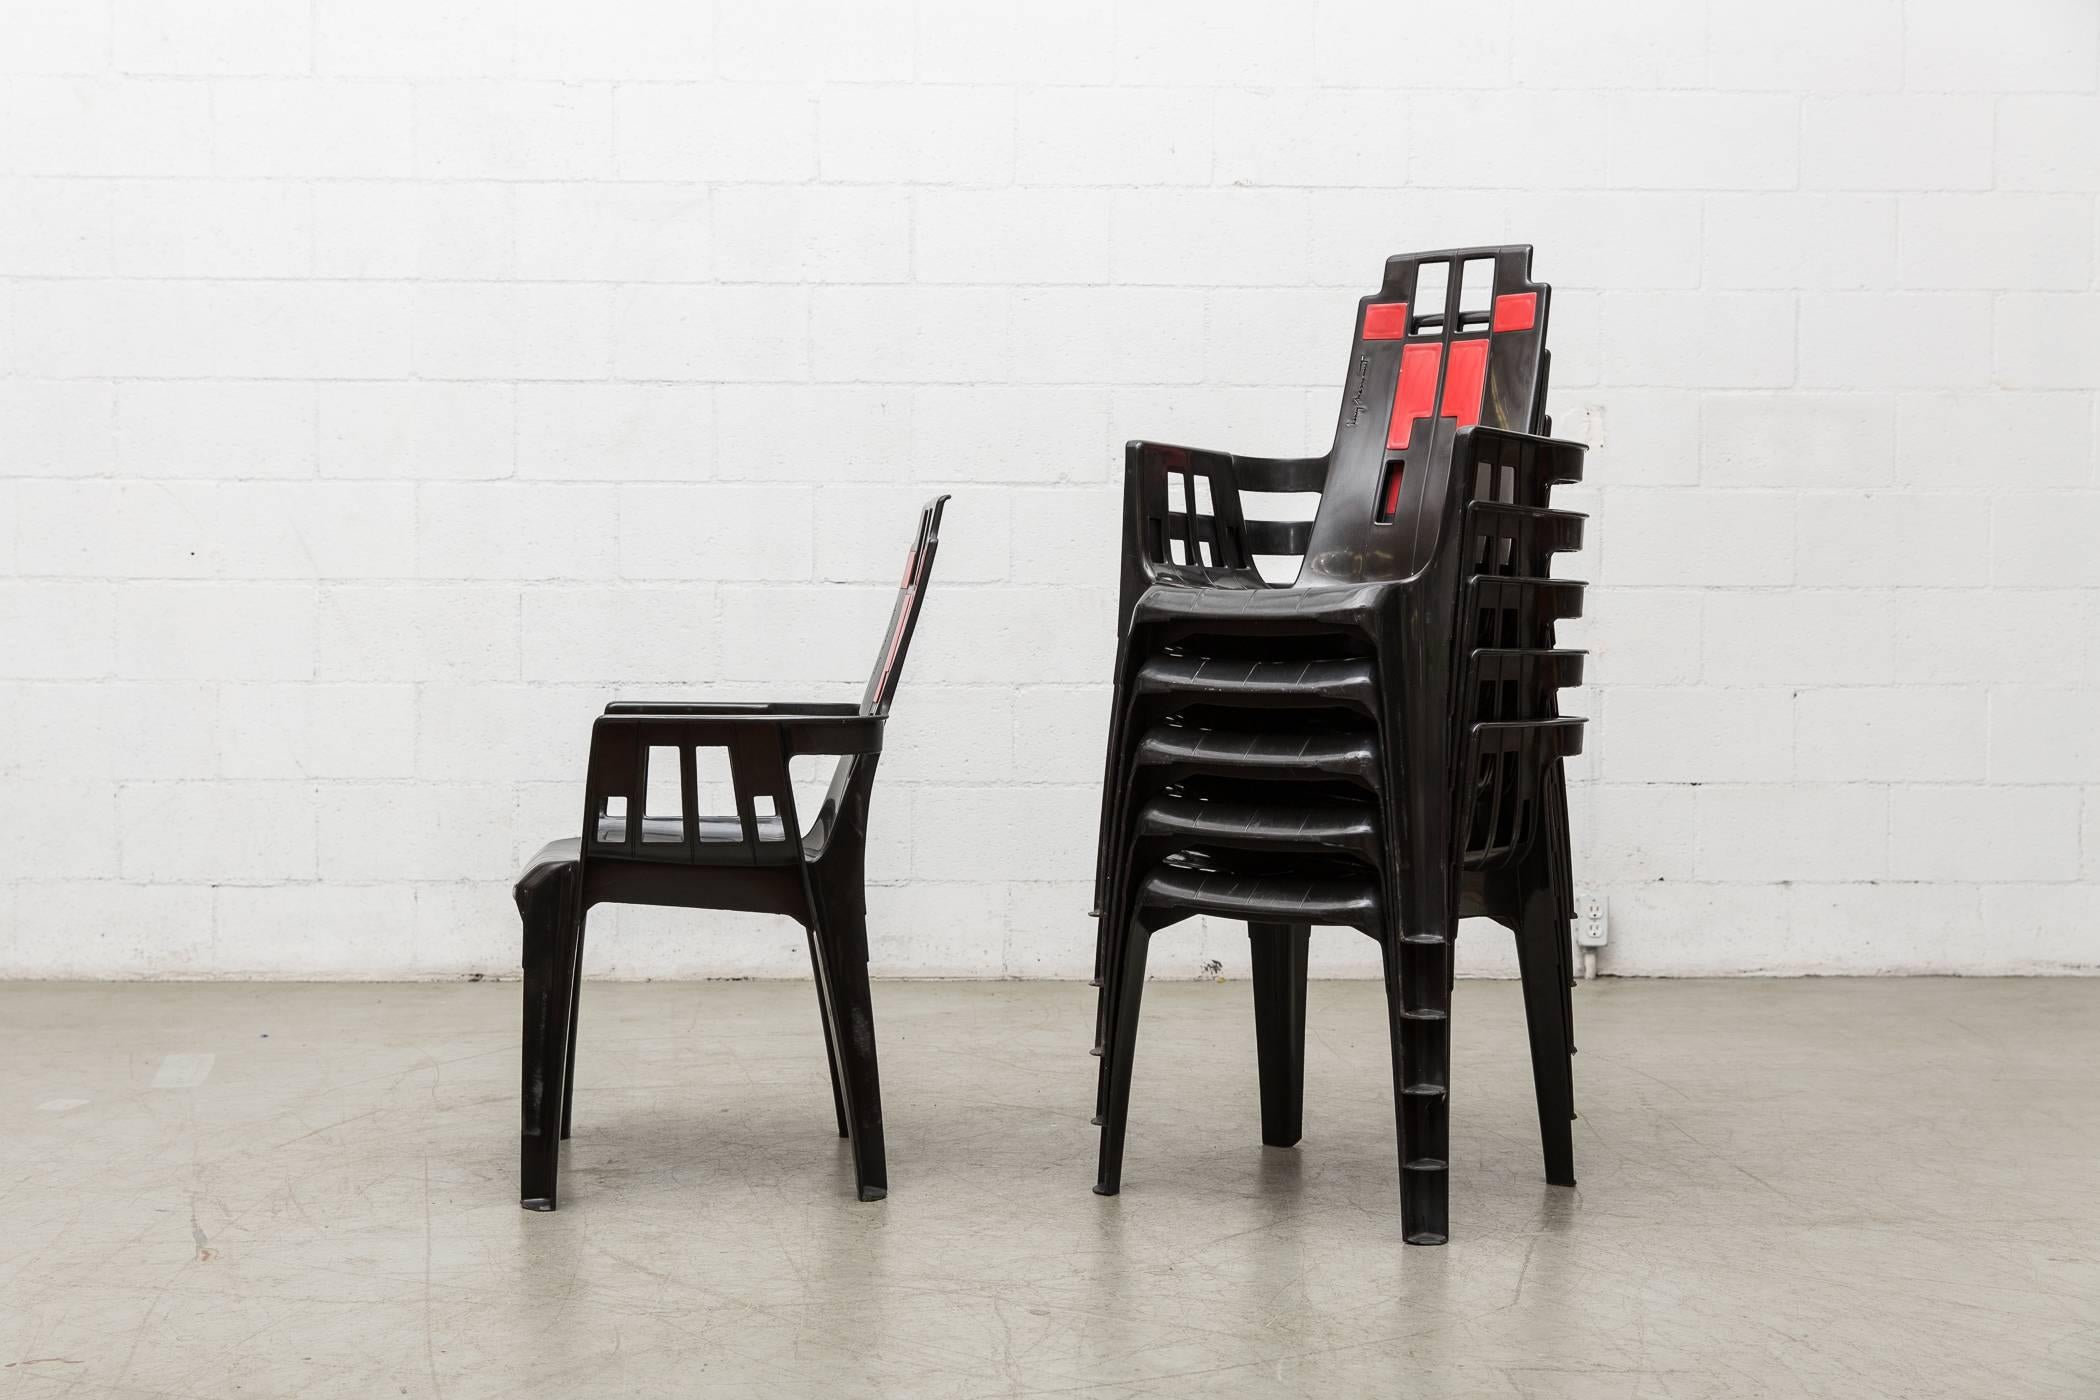 Great group of Boston garden chairs by French furniture designer Pierre Paulin and manufactured by Henry Massonnet/STAMP in 1988.  Paulin was influenced here by (and built on the work of) Dutch 